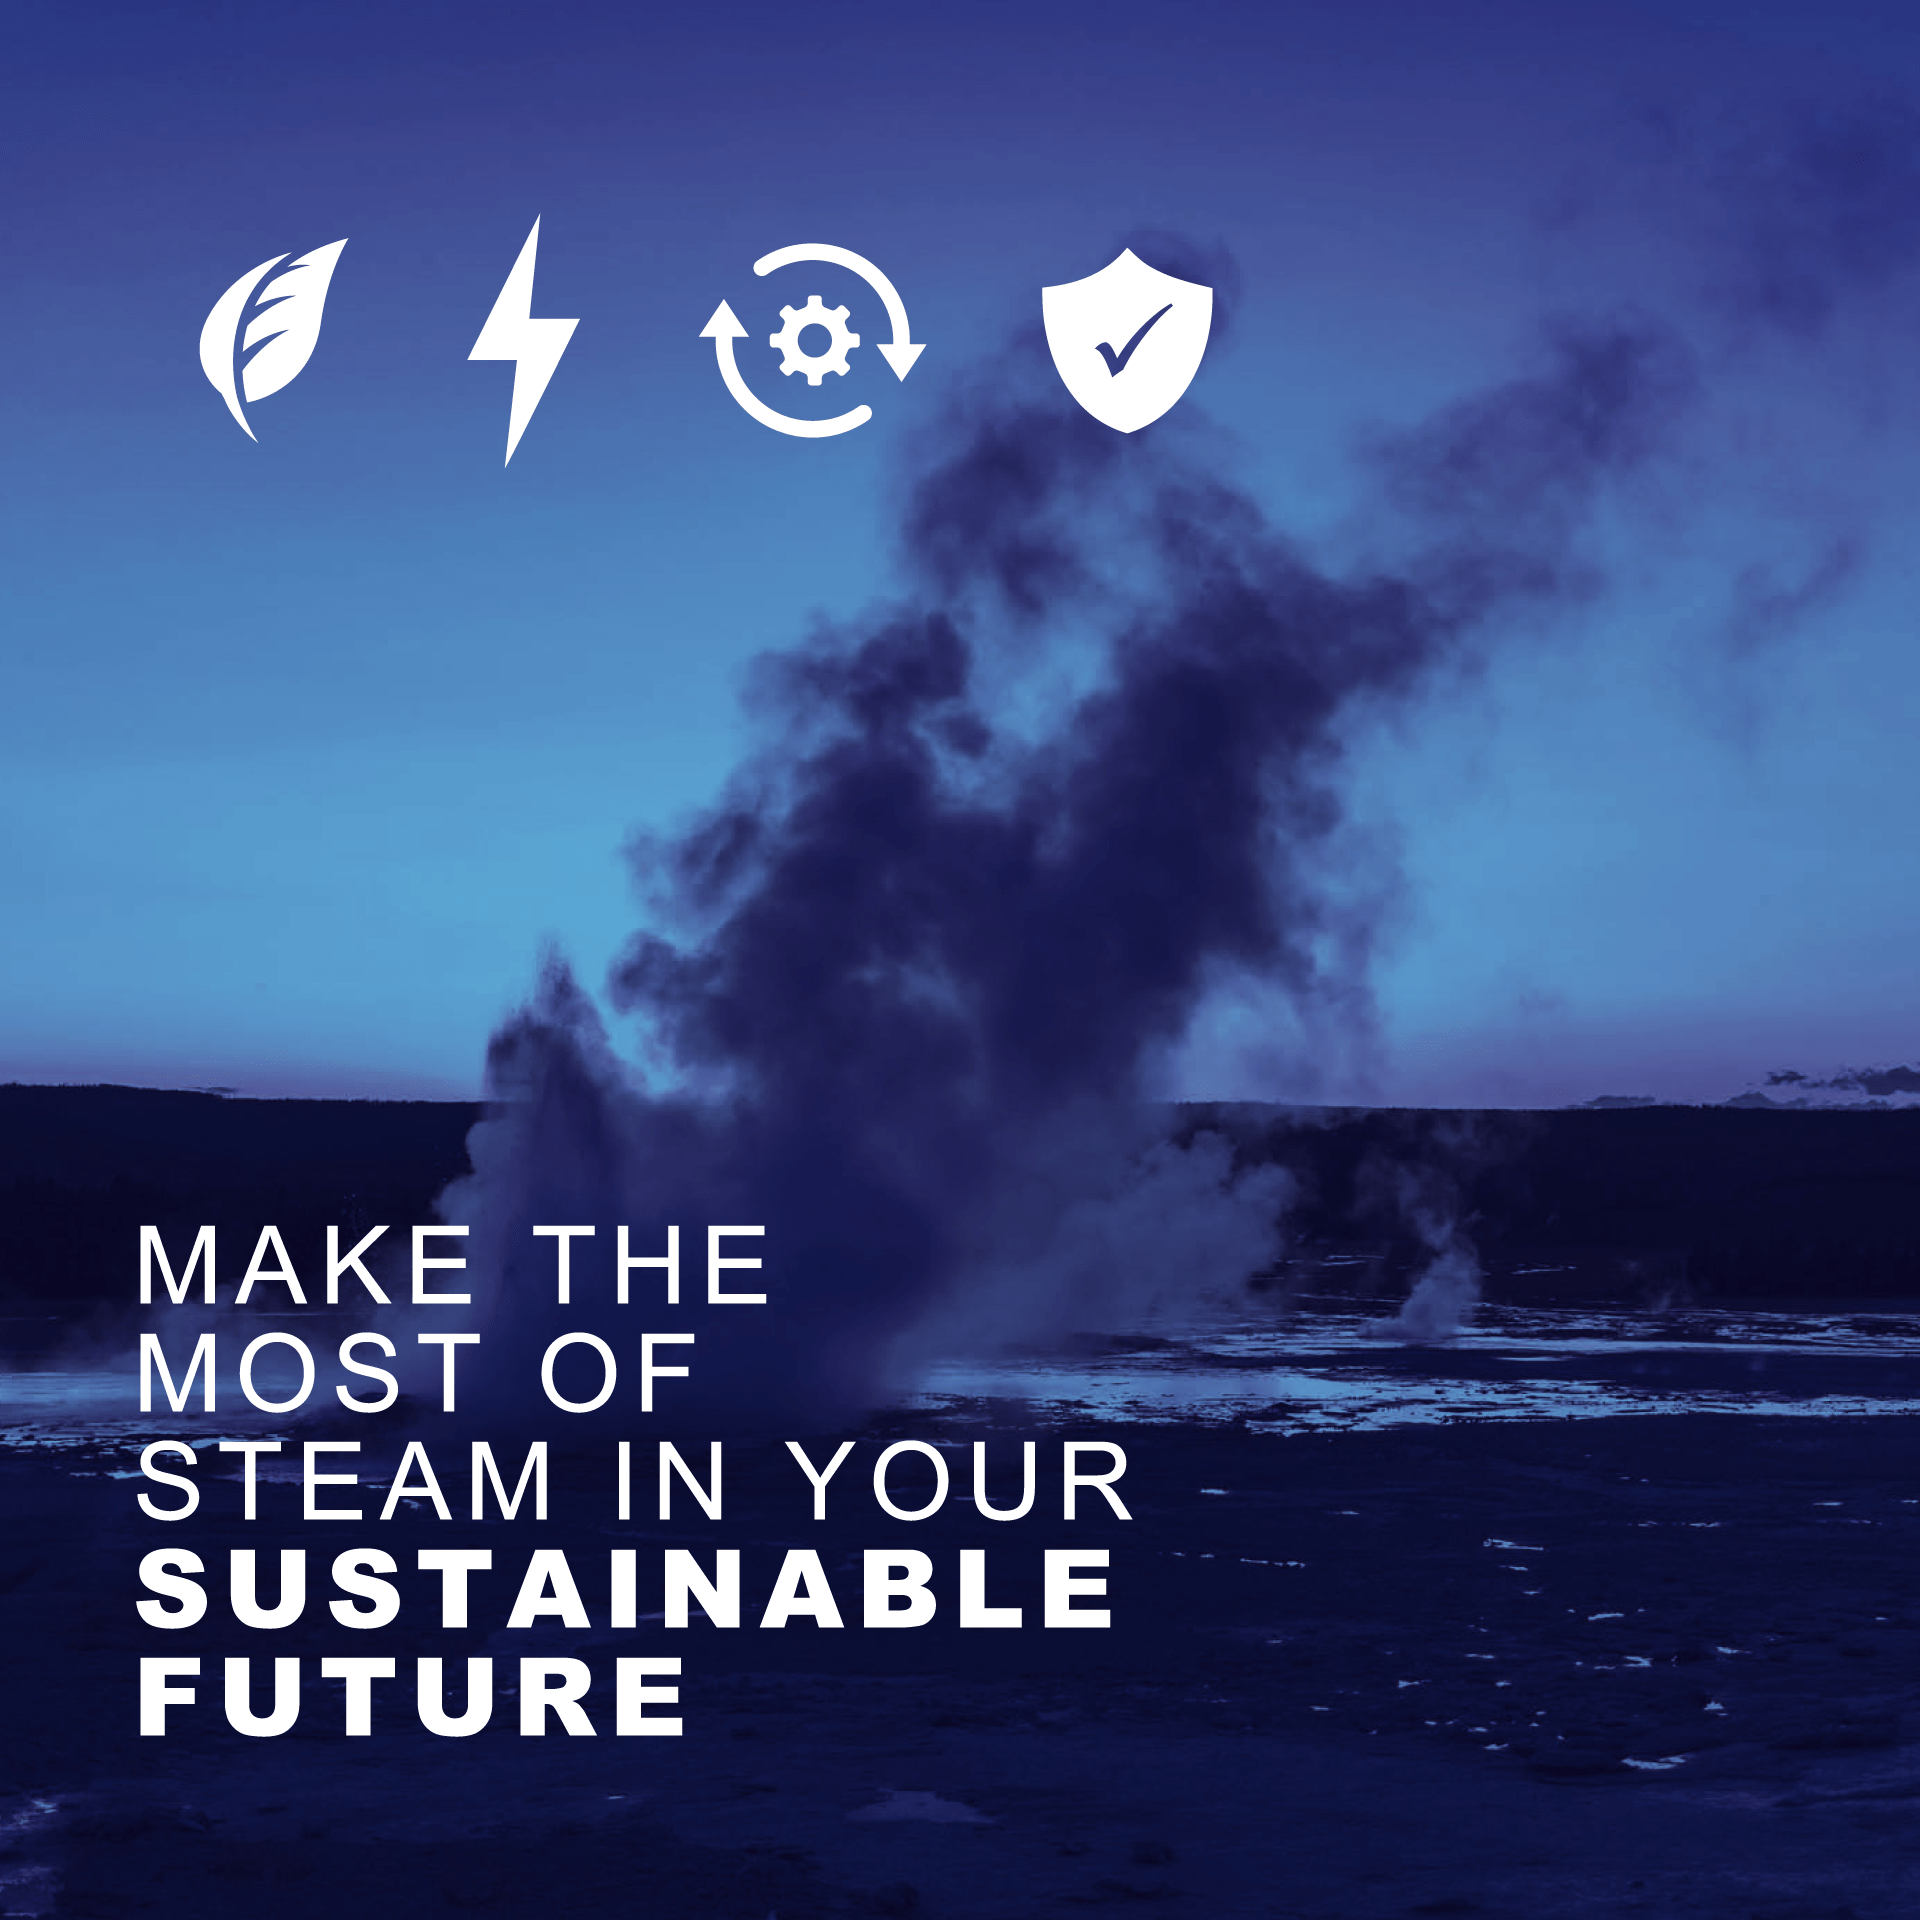 Make the most of your sustainable future